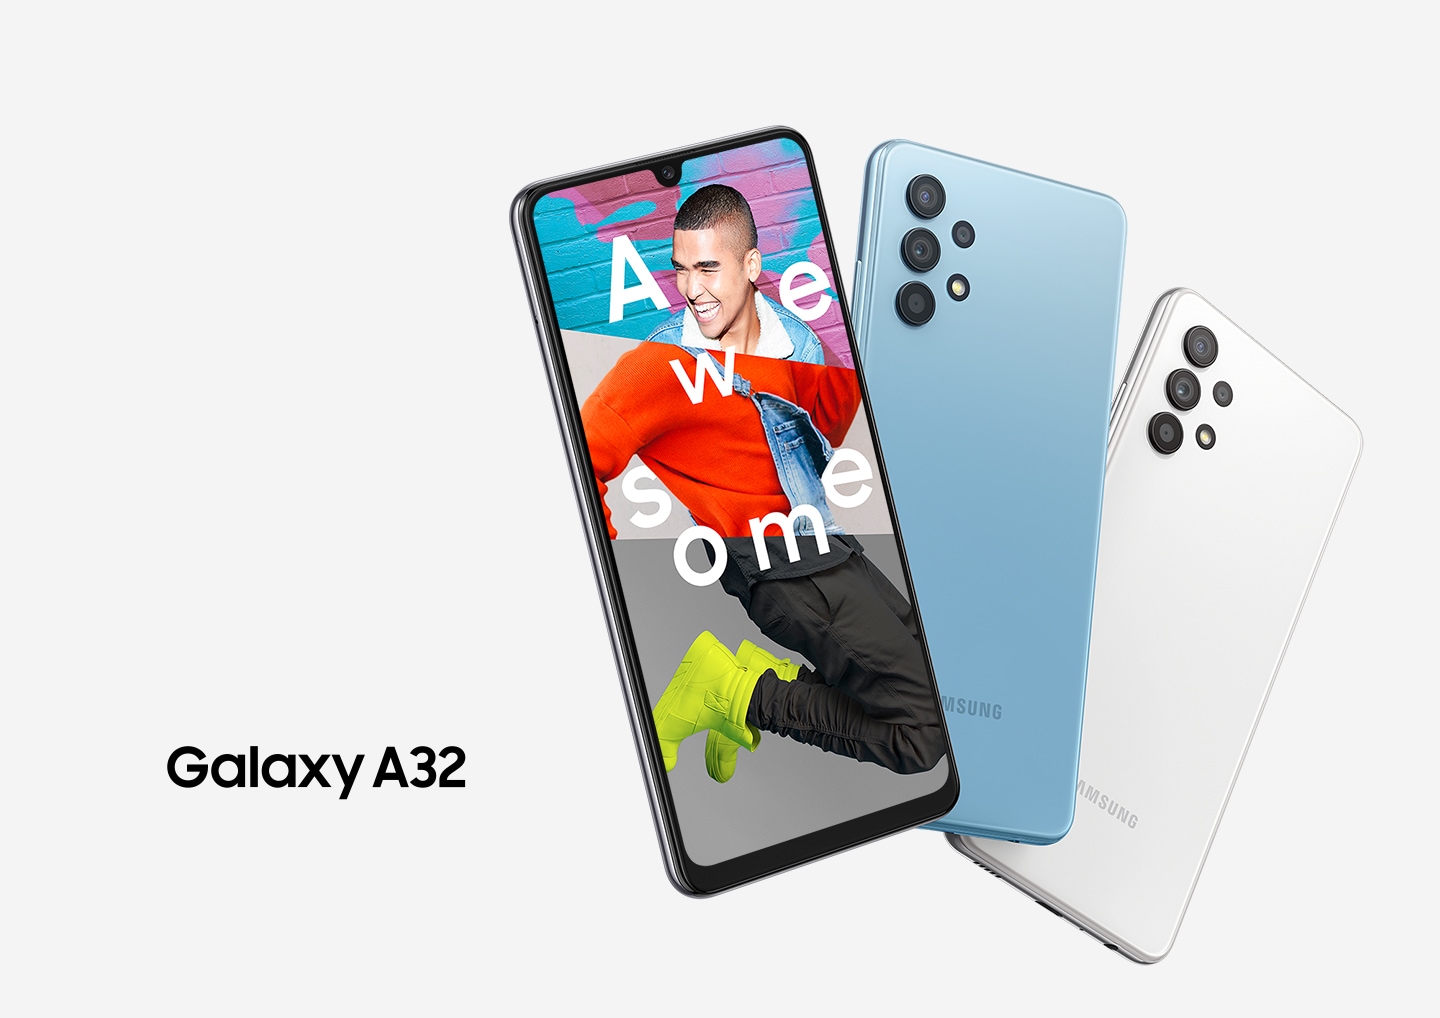 three samsung galaxy a32 in different colors fanned out, black, blue and white. The display shows a young man hopping with the word awesome on the screen.